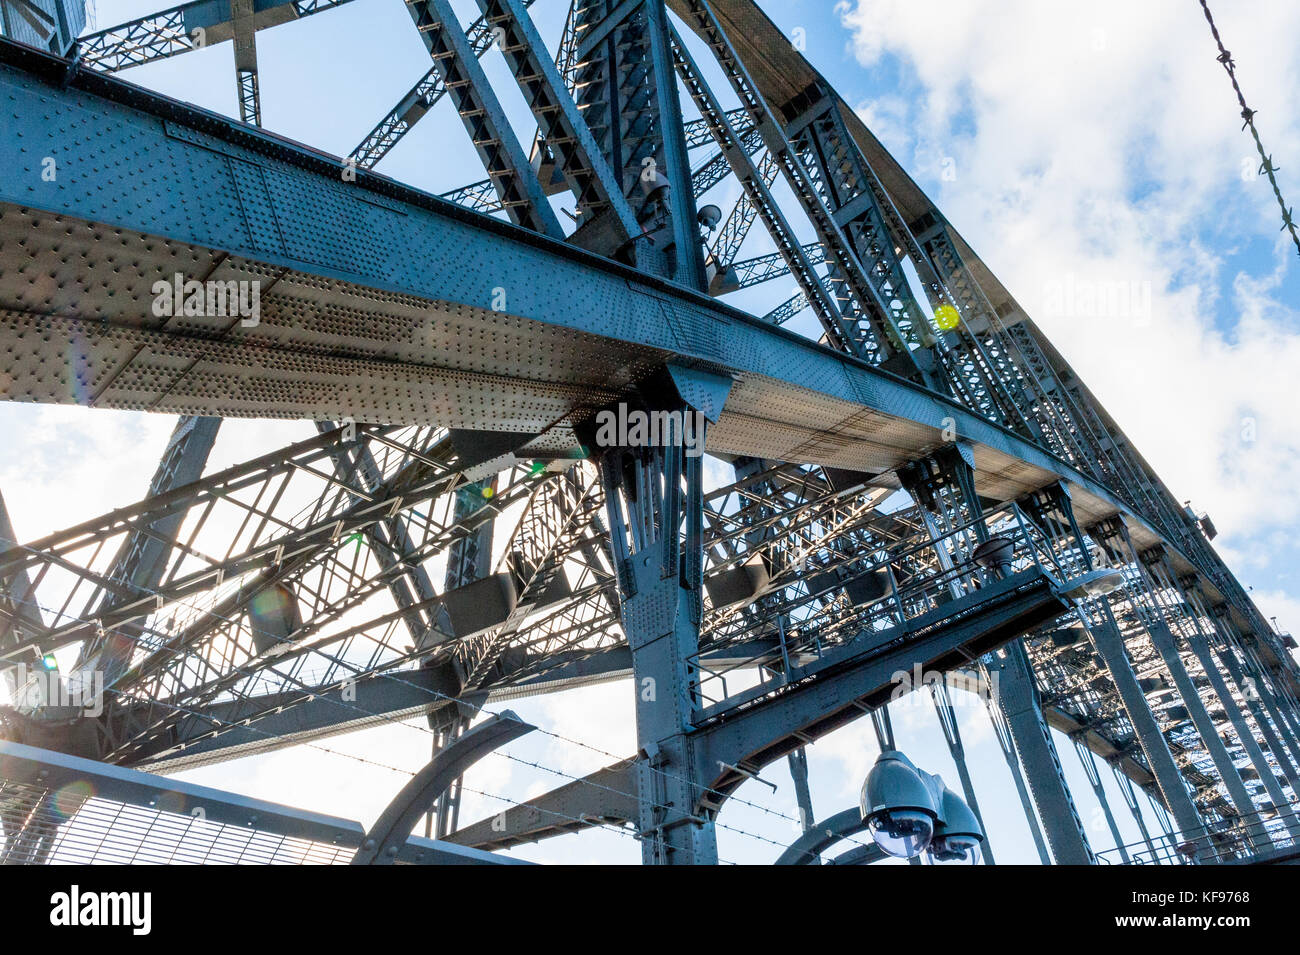 Looking up at the metal work structure of The Sydney Harbour Bridge, Australia, New South Wales. Stock Photo